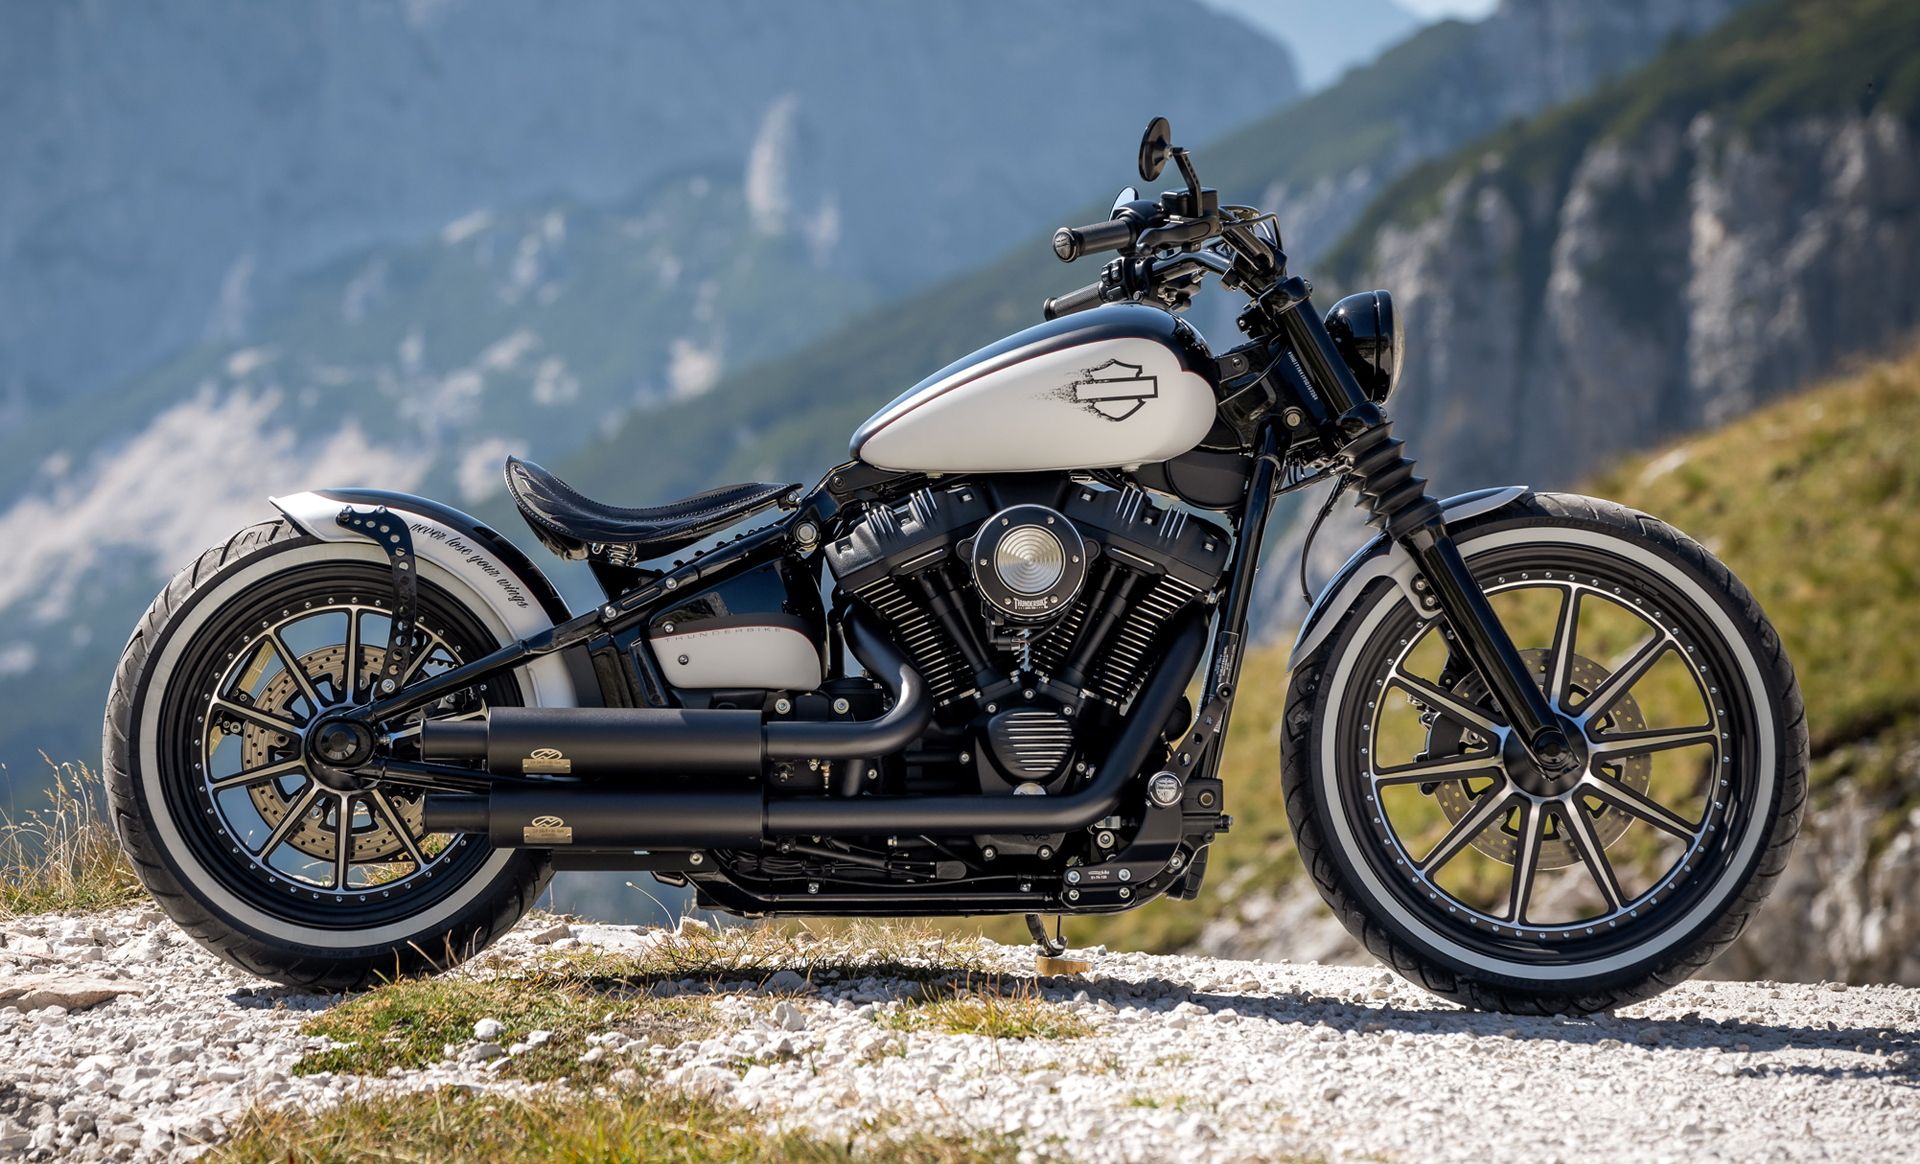 Bobber Custom Motorcycles by Thunderbike, real players never lose